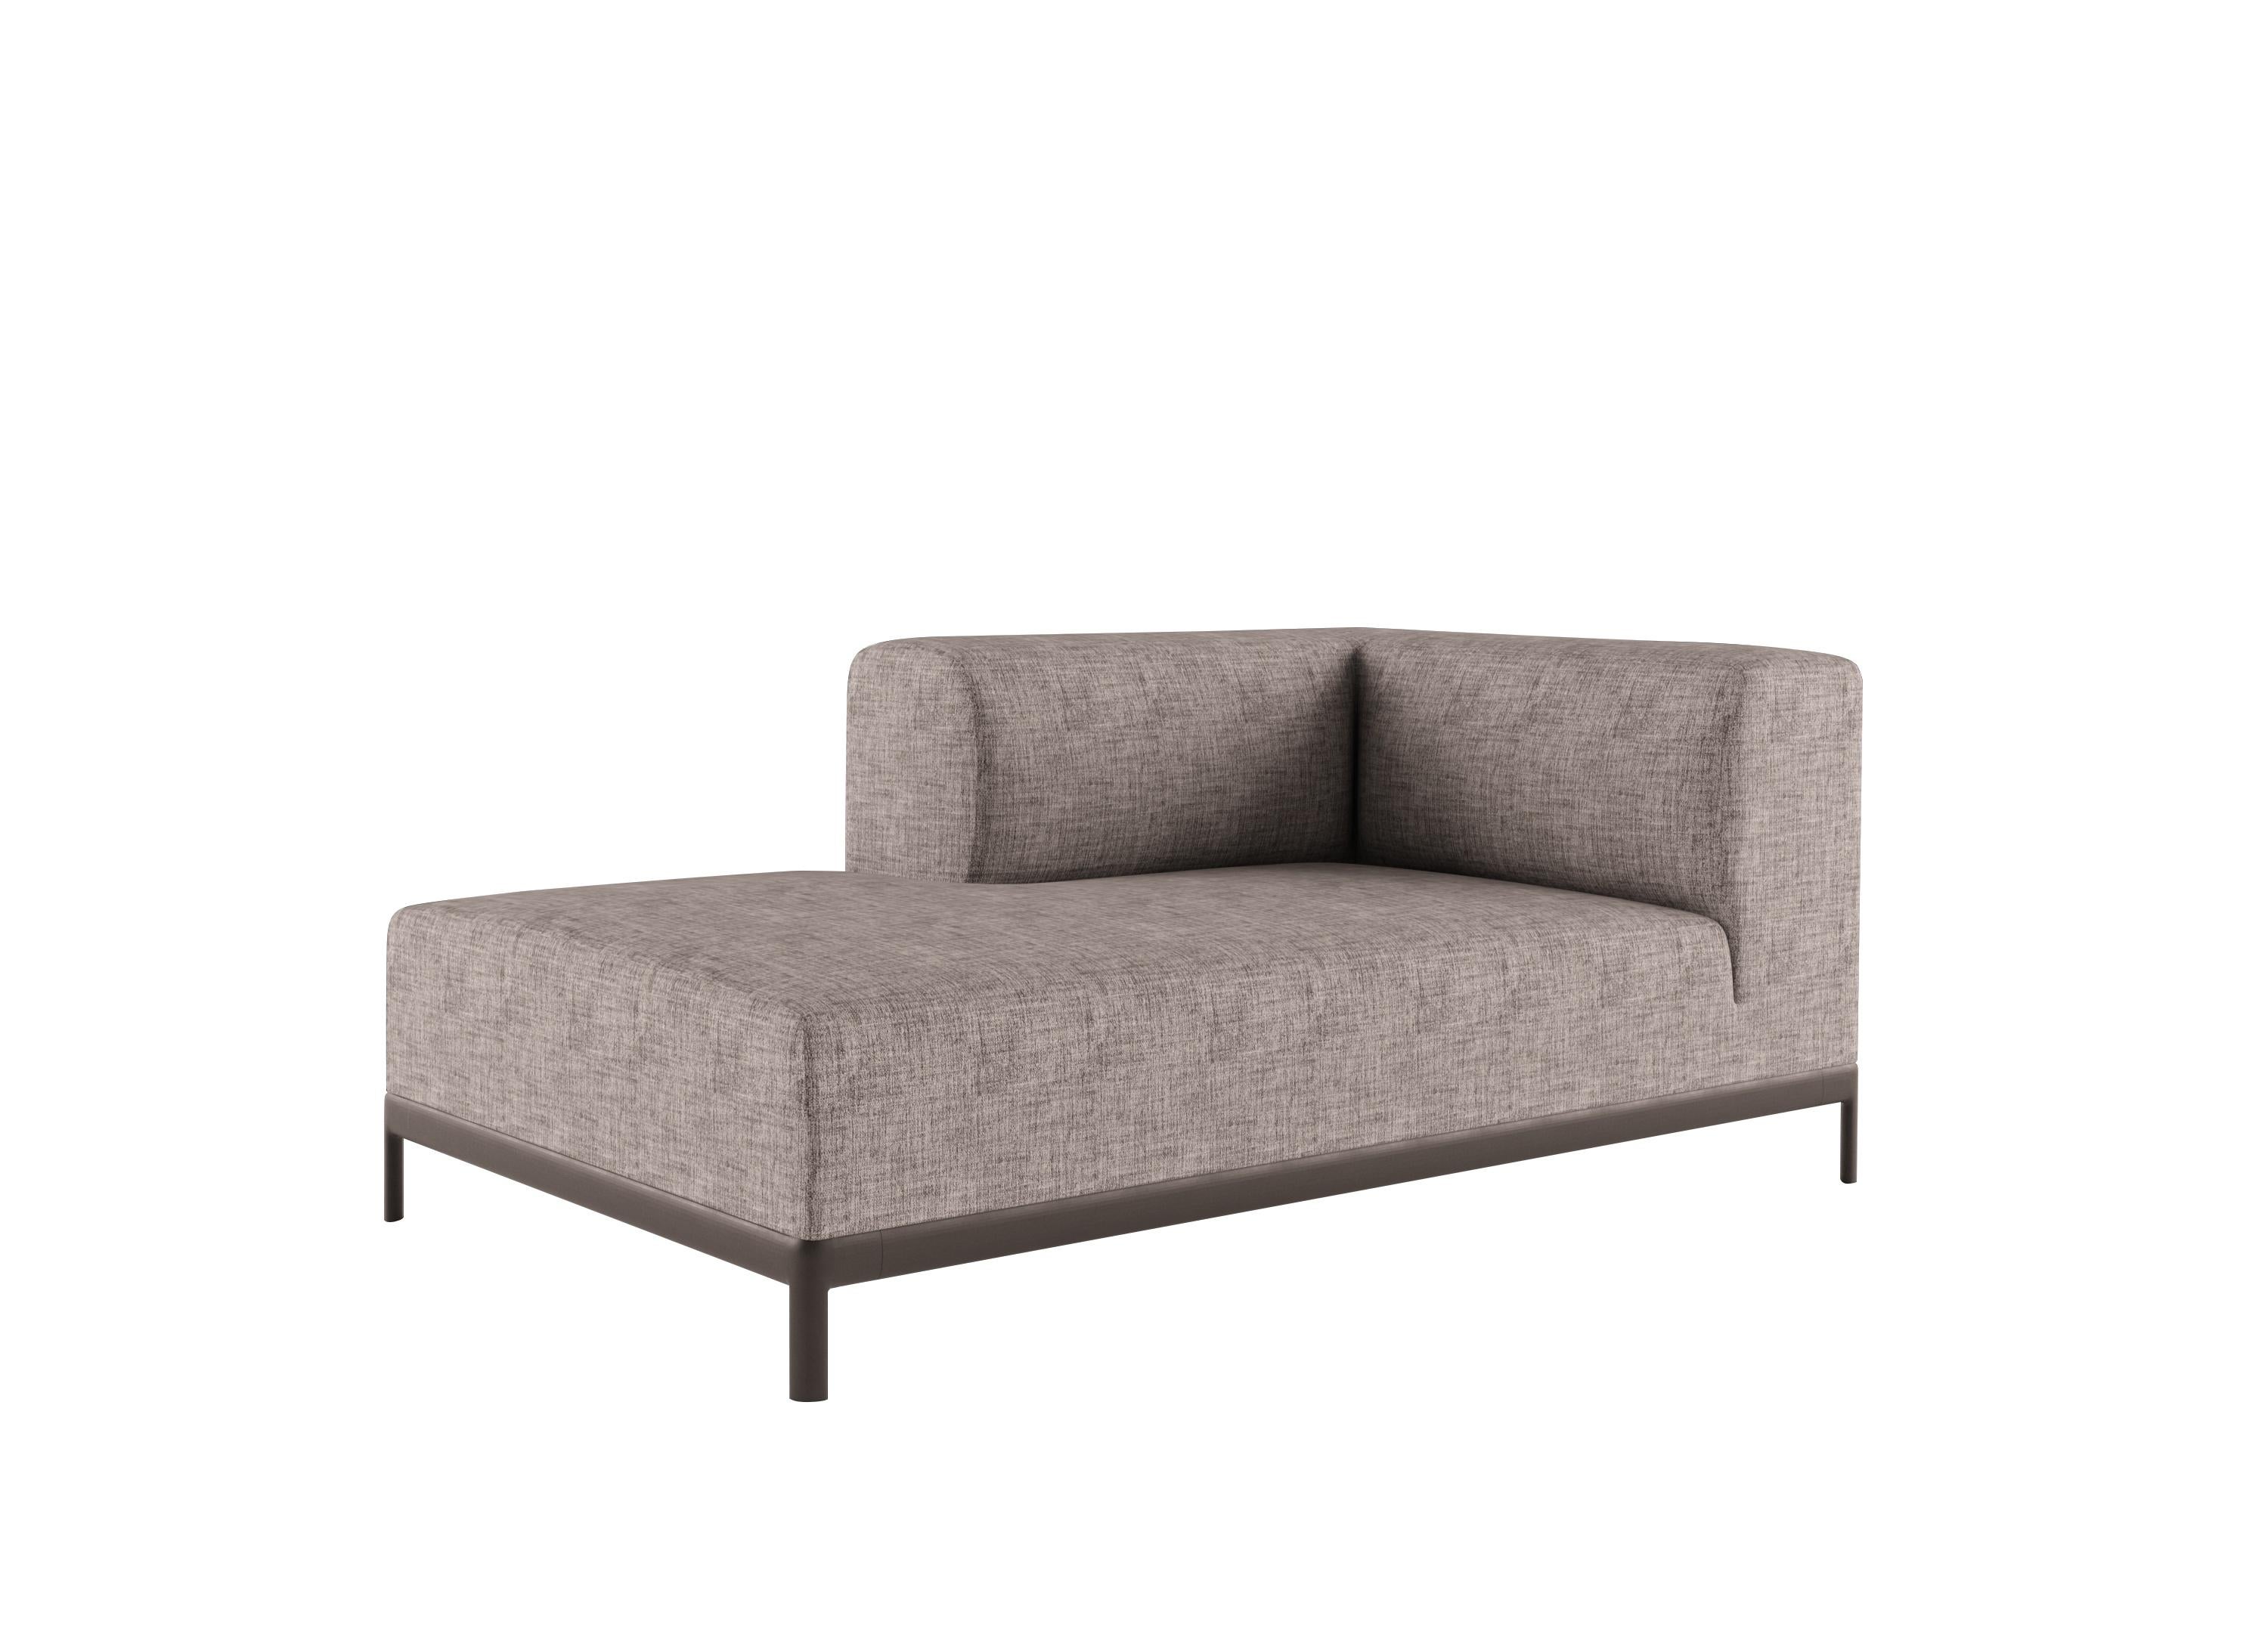 Alias P39 AluZen Soft Ending Sofa with Upholstery and Lacquered Aluminum Frame by Ludovica+Roberto Palomba

Modular corner element with structure in lacquered or polished aluminium.Seat, back and armrest with removable cover in fabric or